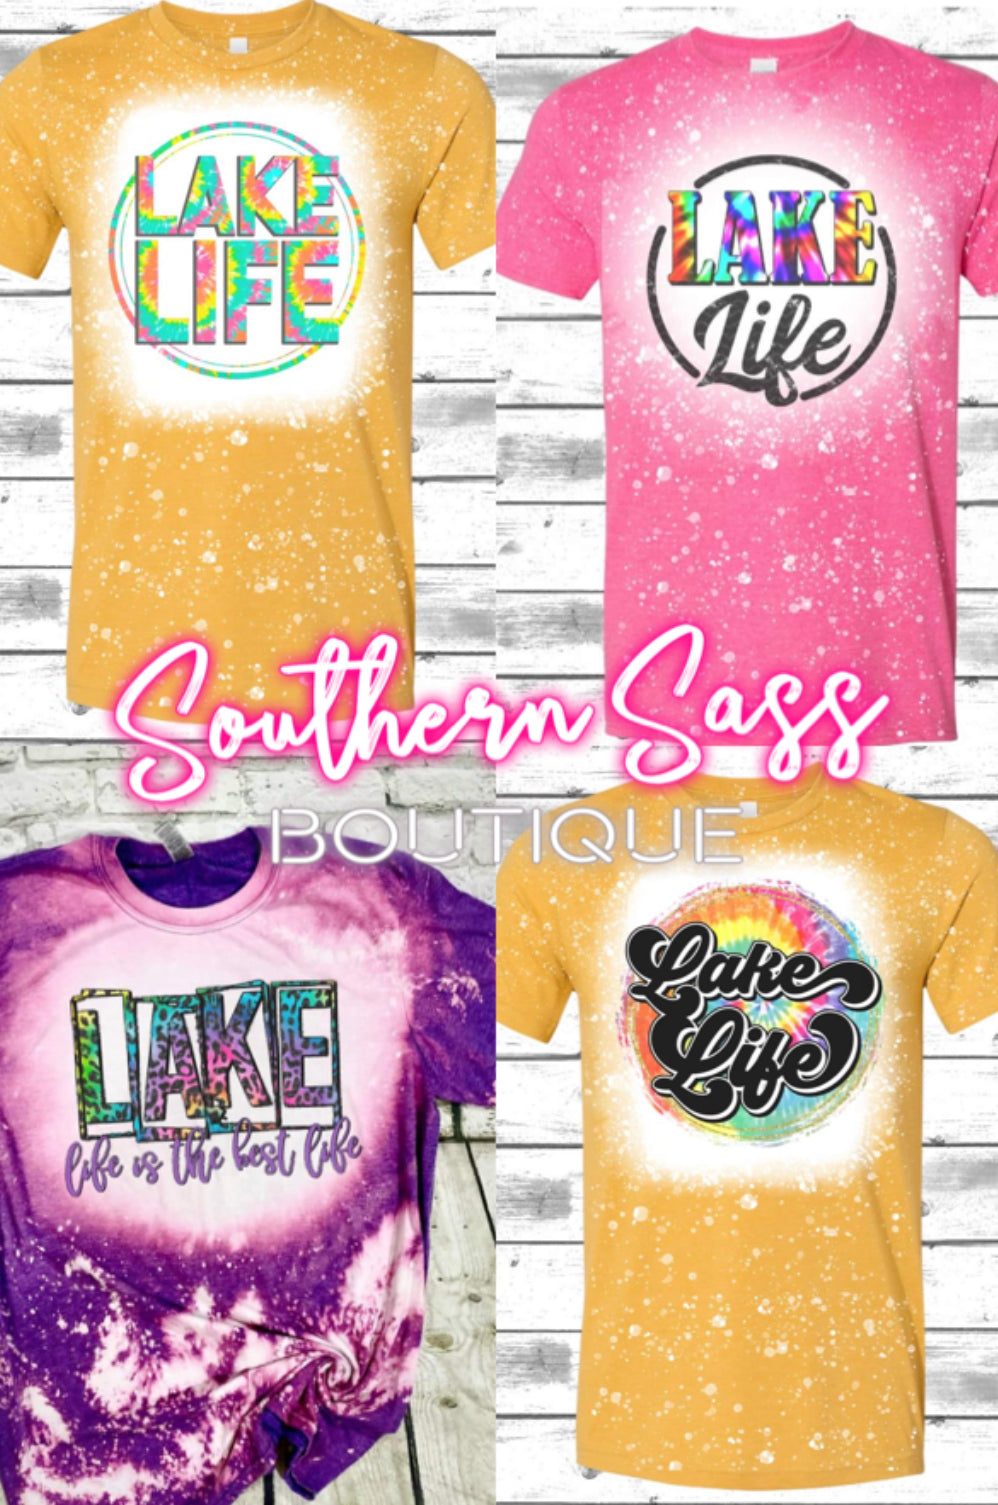 LAKE LIFE BLEACHED GRAPHIC TEES